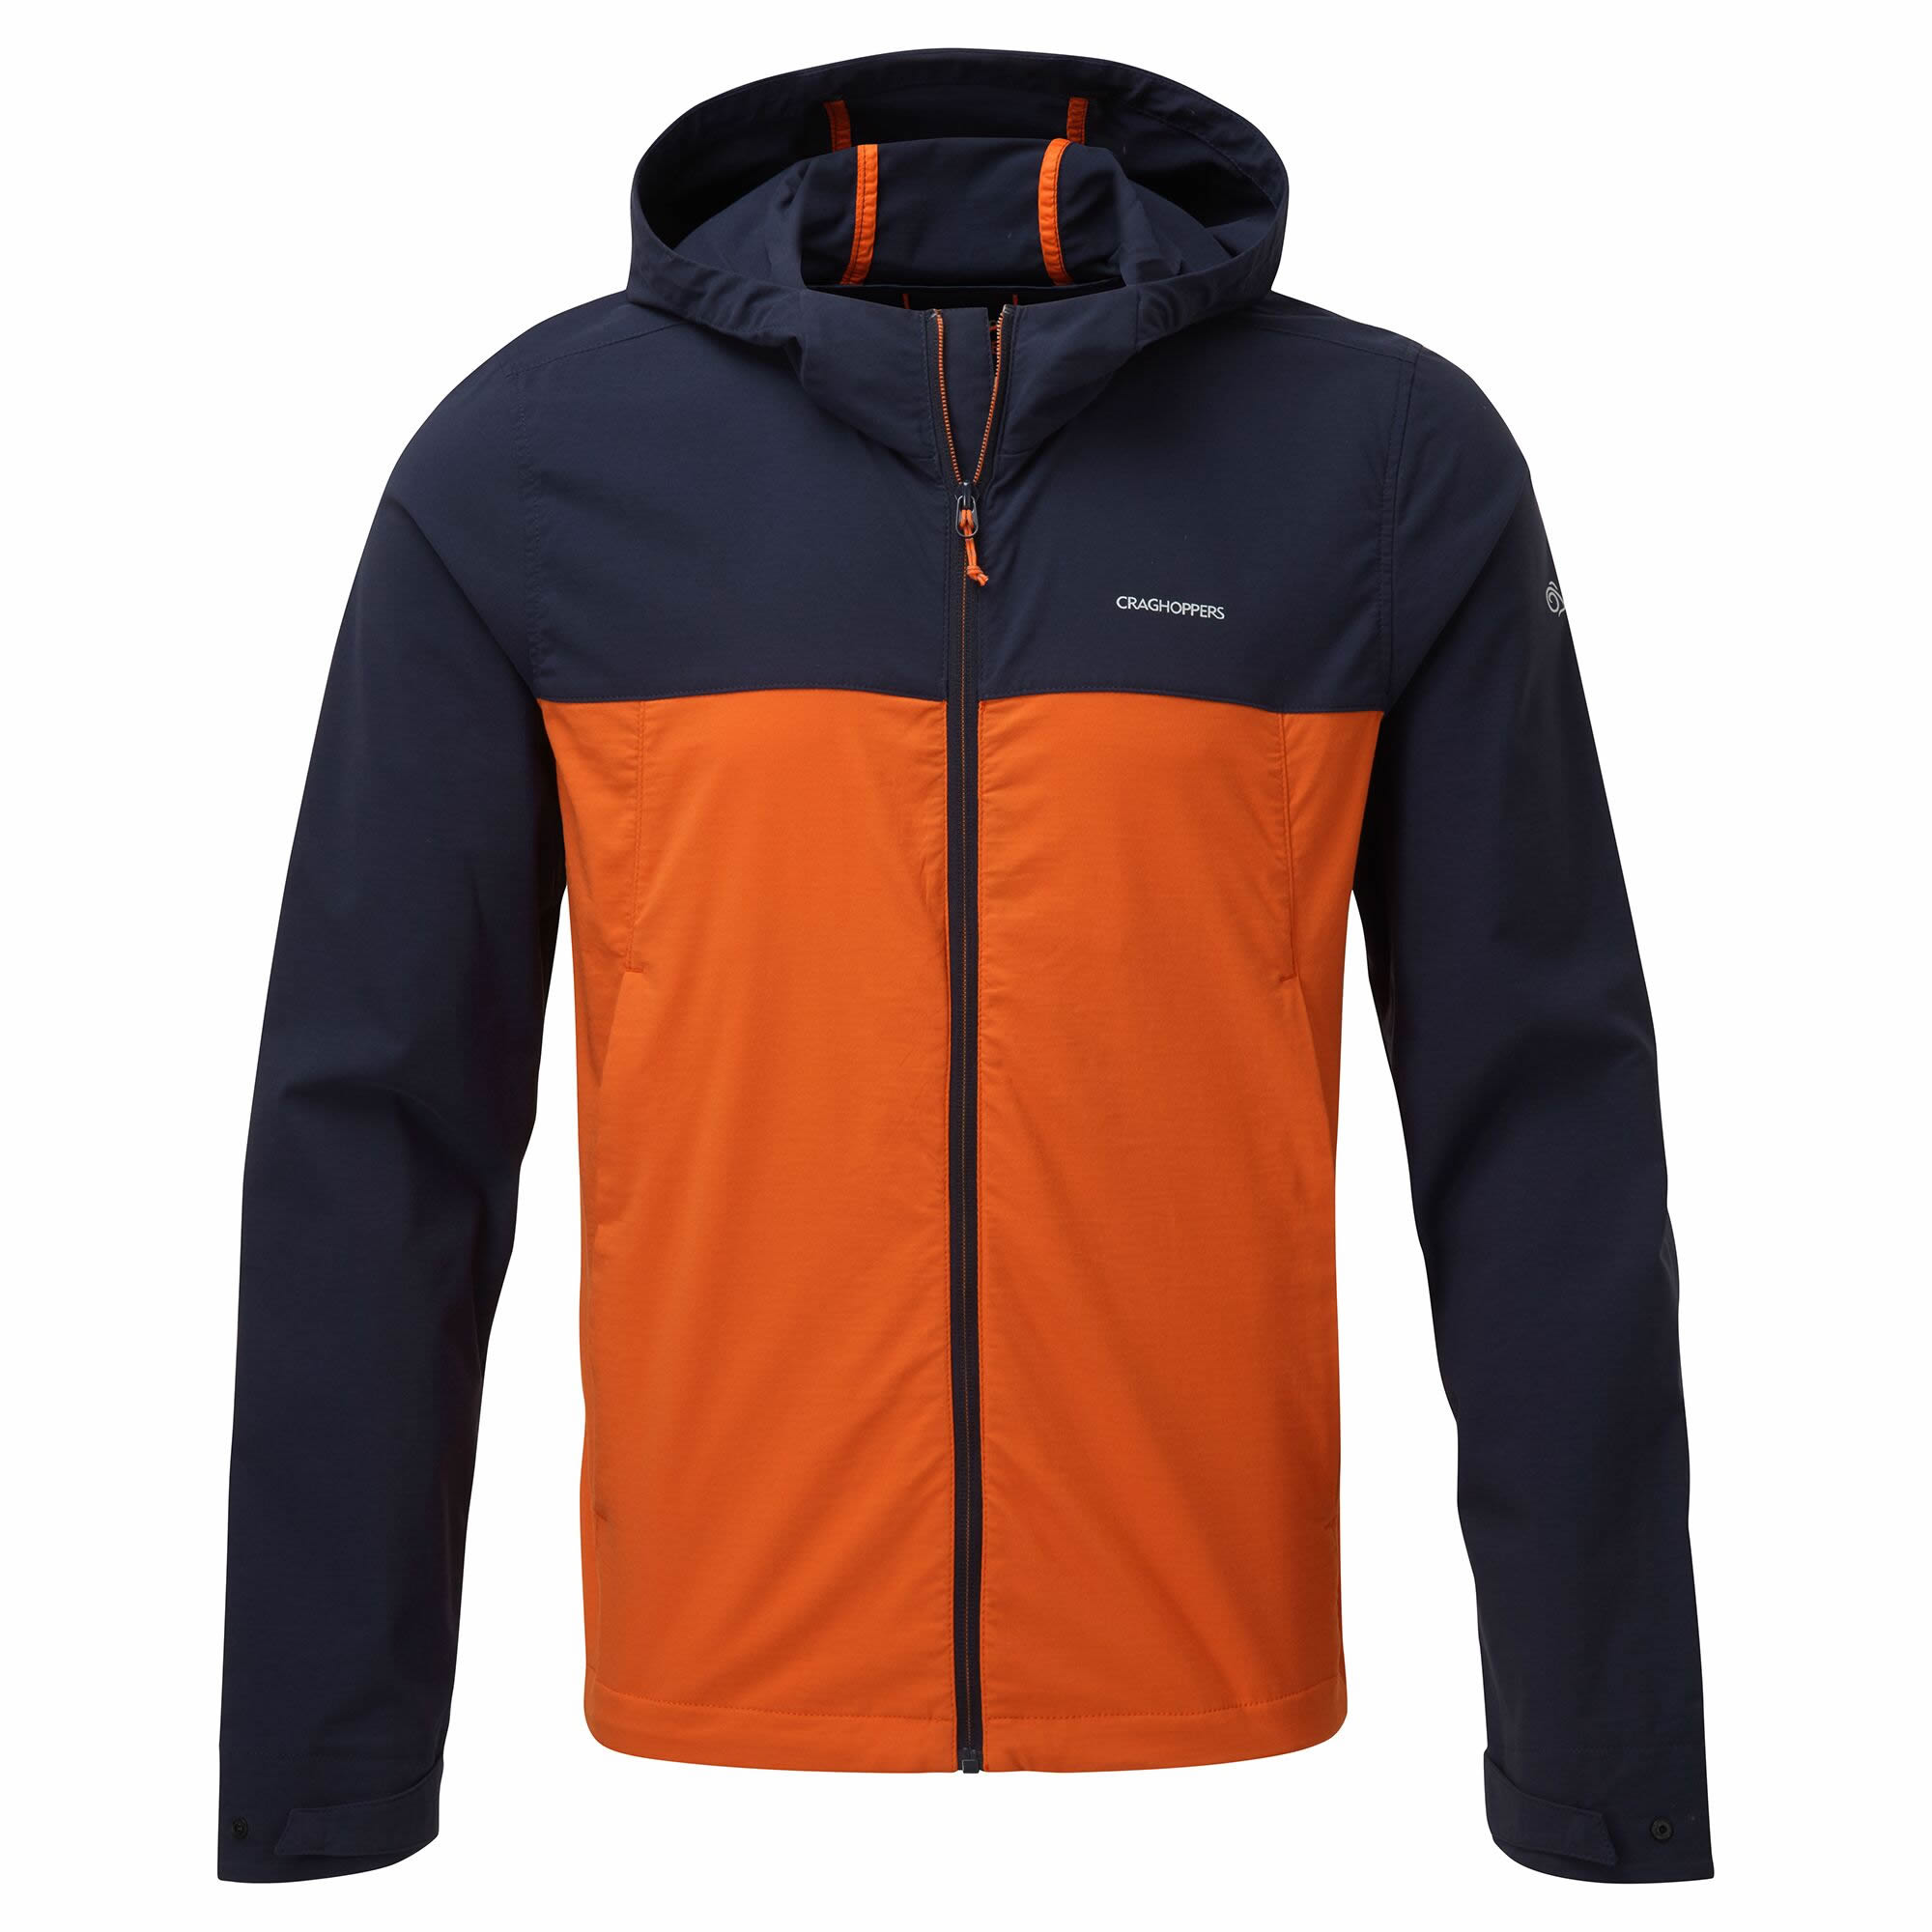 Mens Travel & Outdoor Clothing